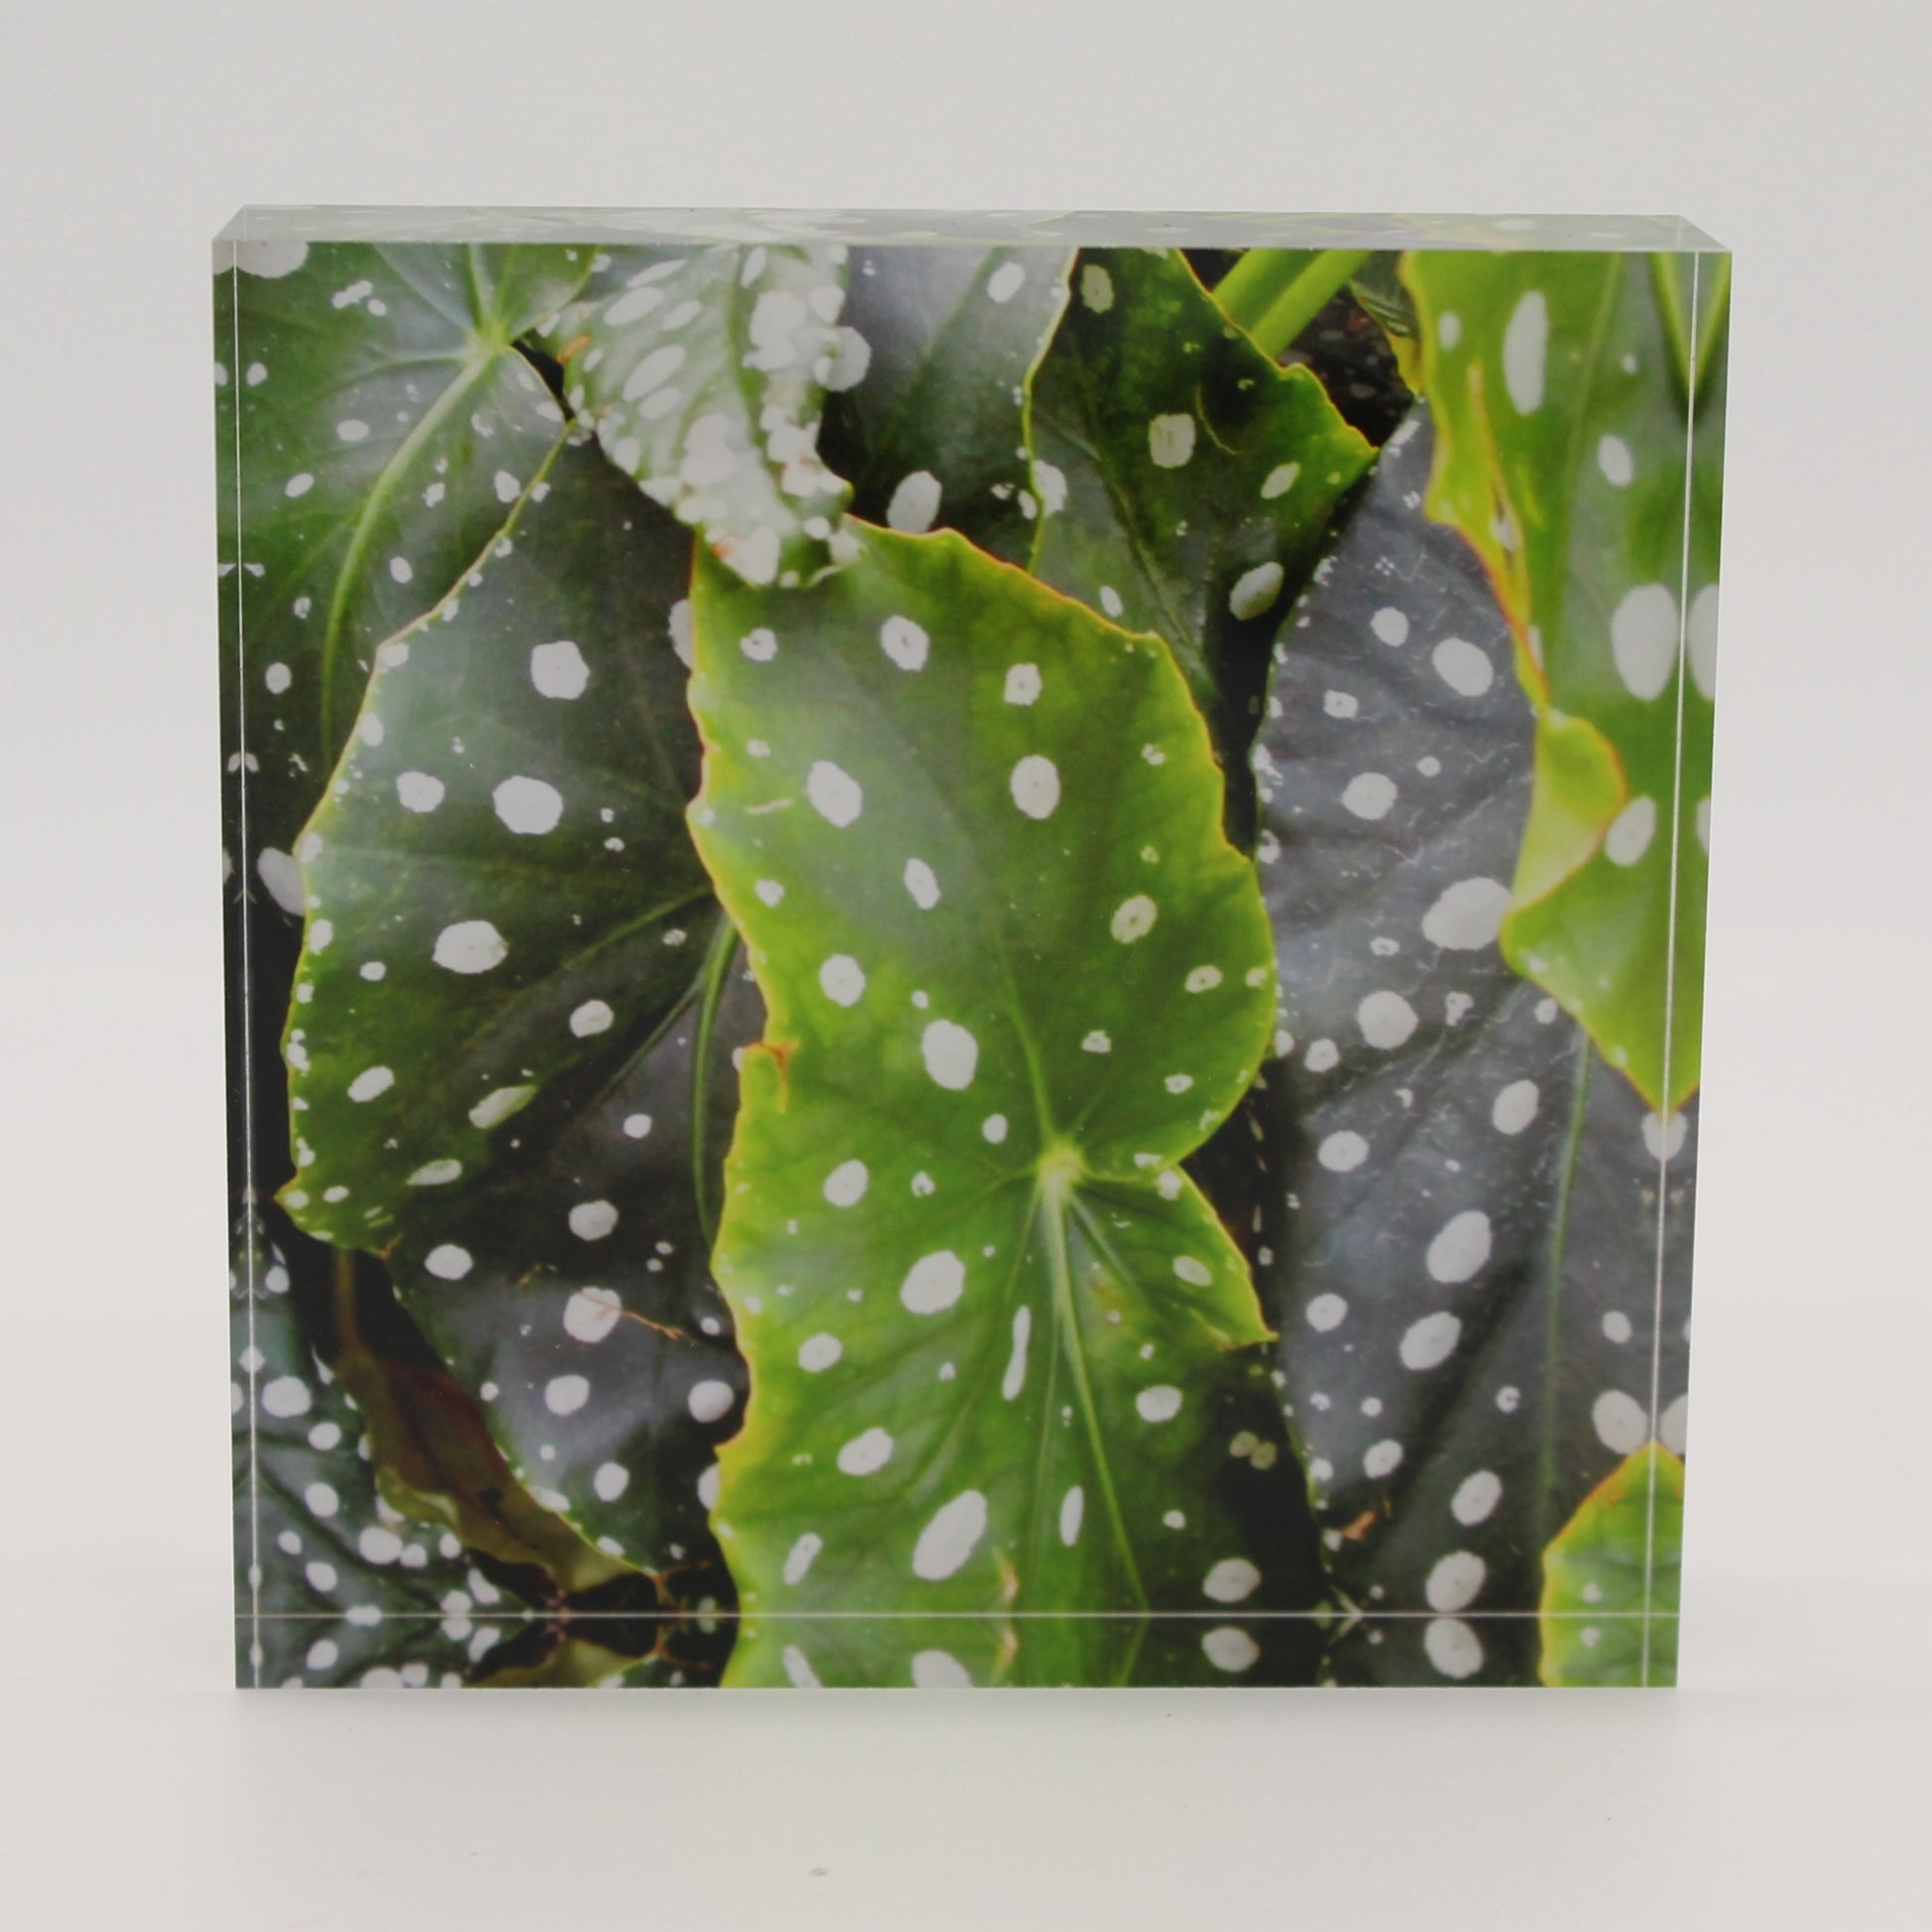 Acrylic block depicting water droplets on green leaves